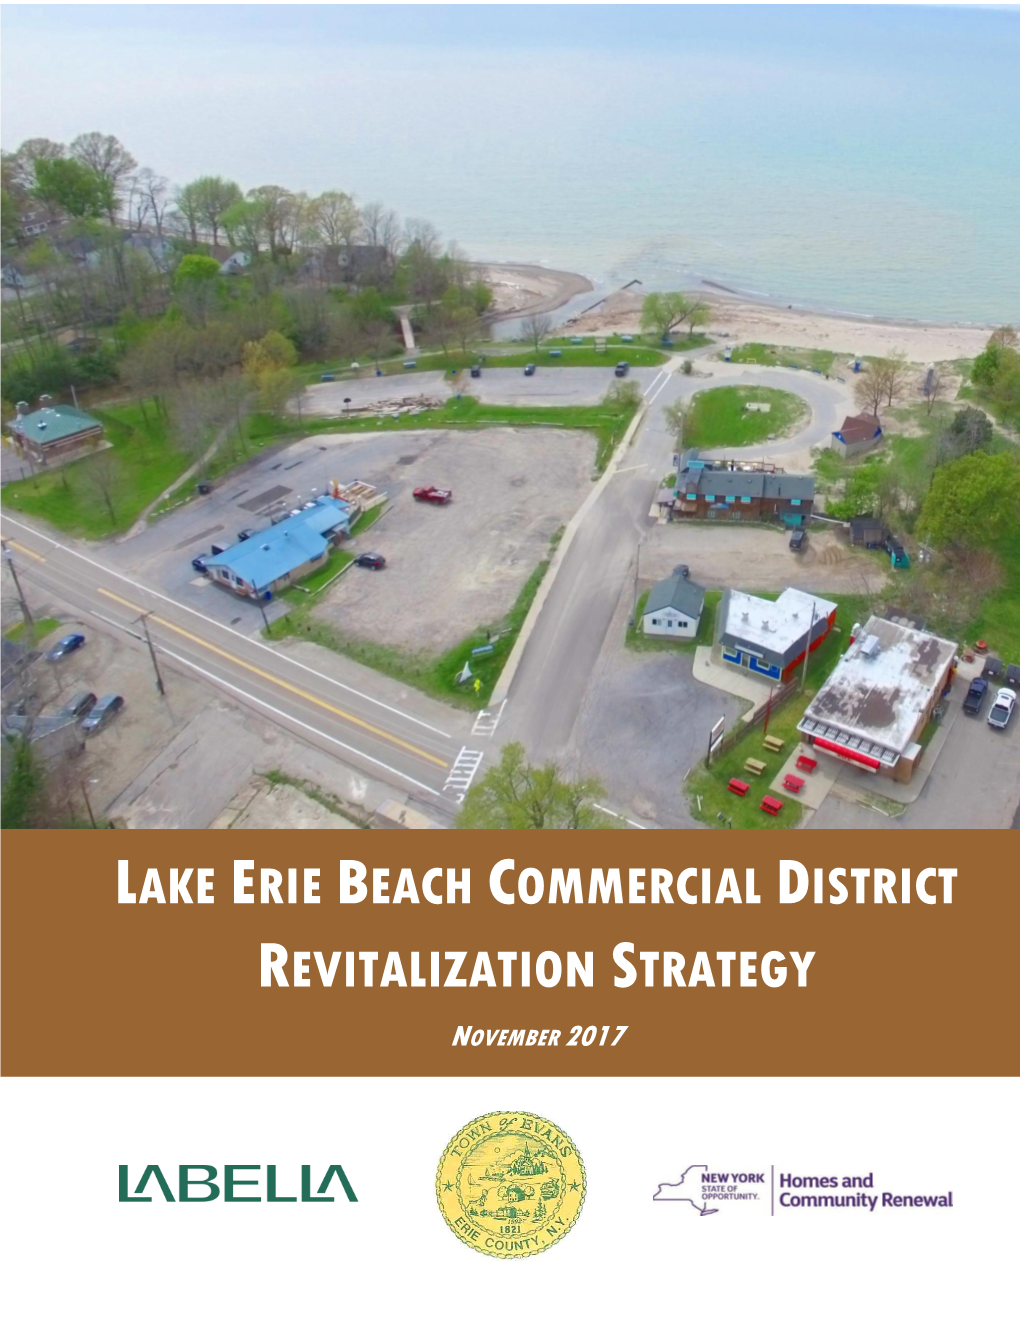 Town of Evans: Lake Erie Beach Business District Revitalization